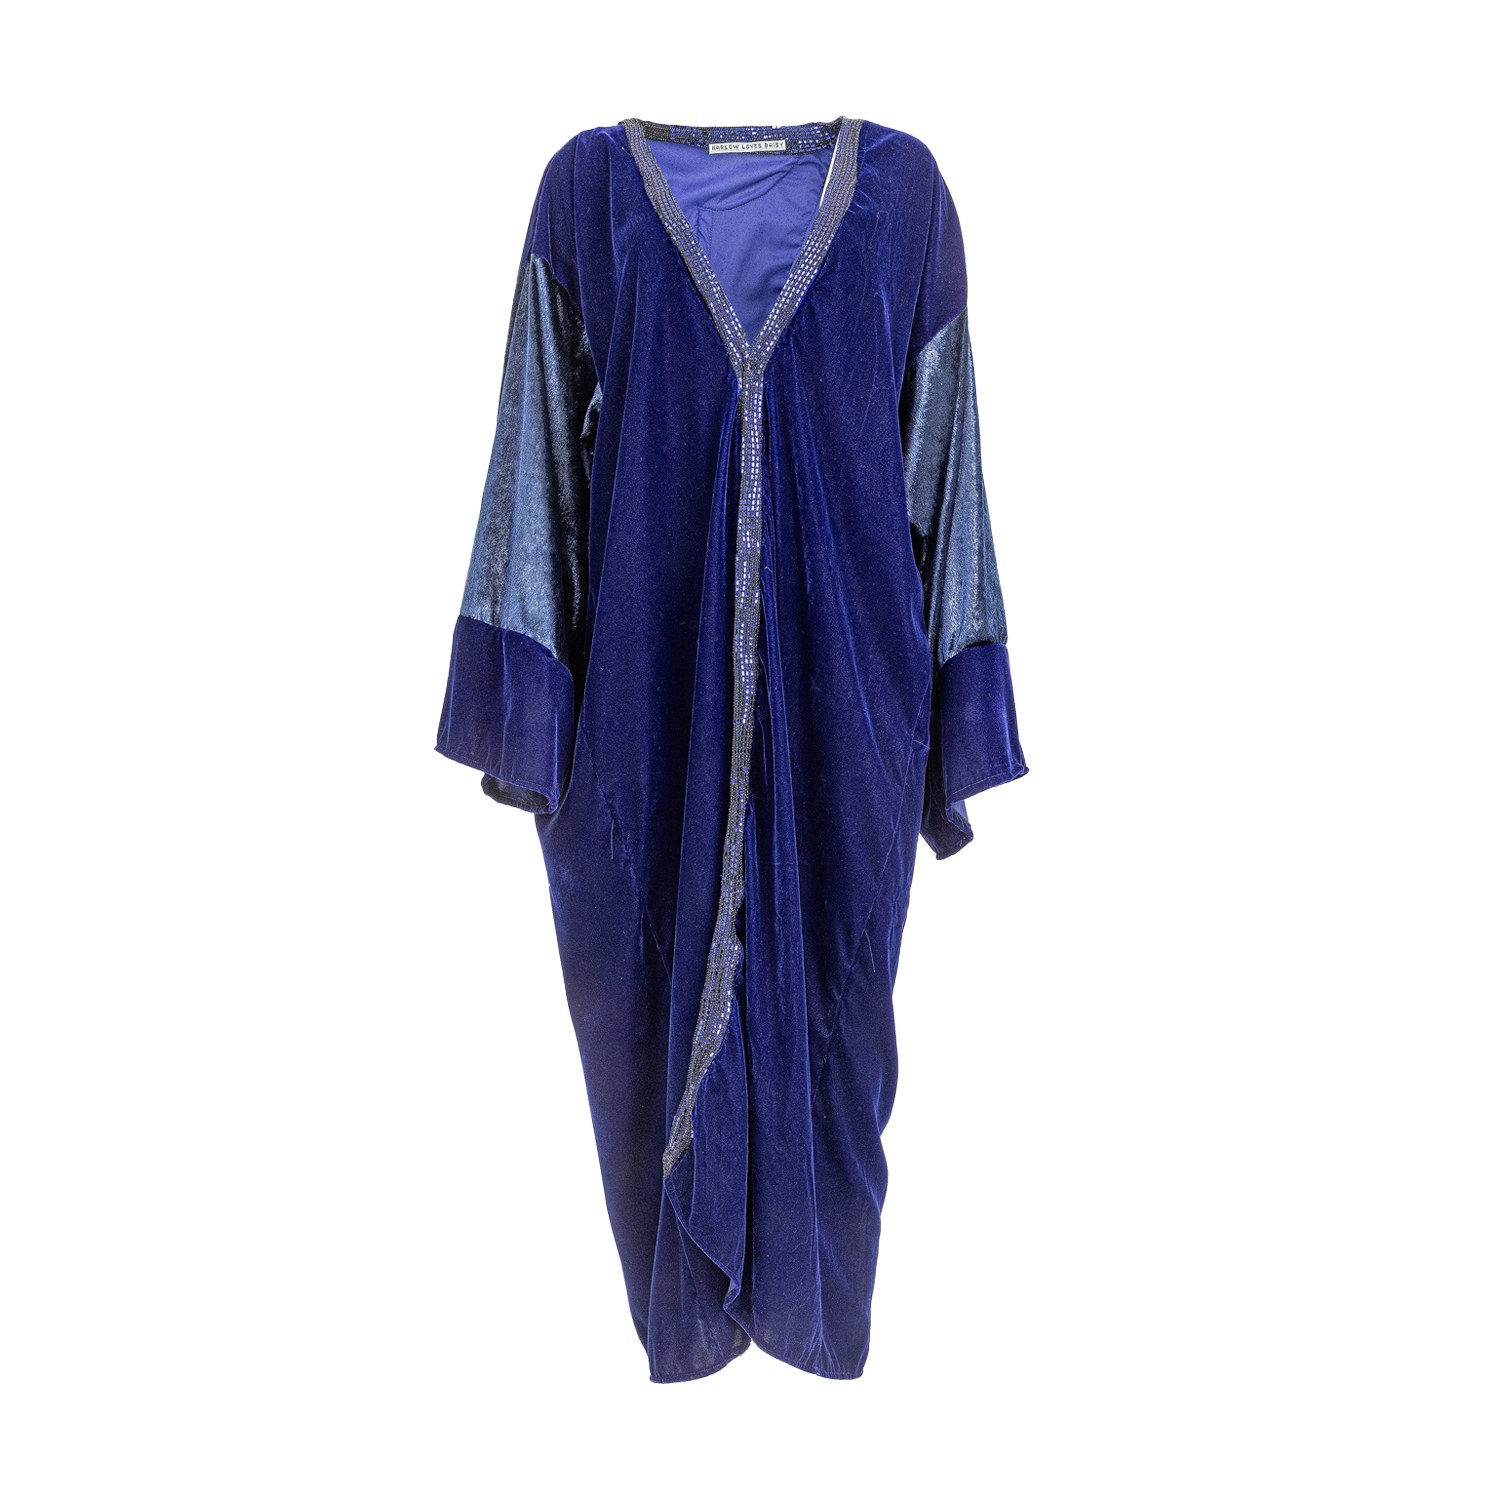 Harlow Loves Daisy Women's Reign - Magnificent Electric Blue Velvet Robe With Bohemian Adornments